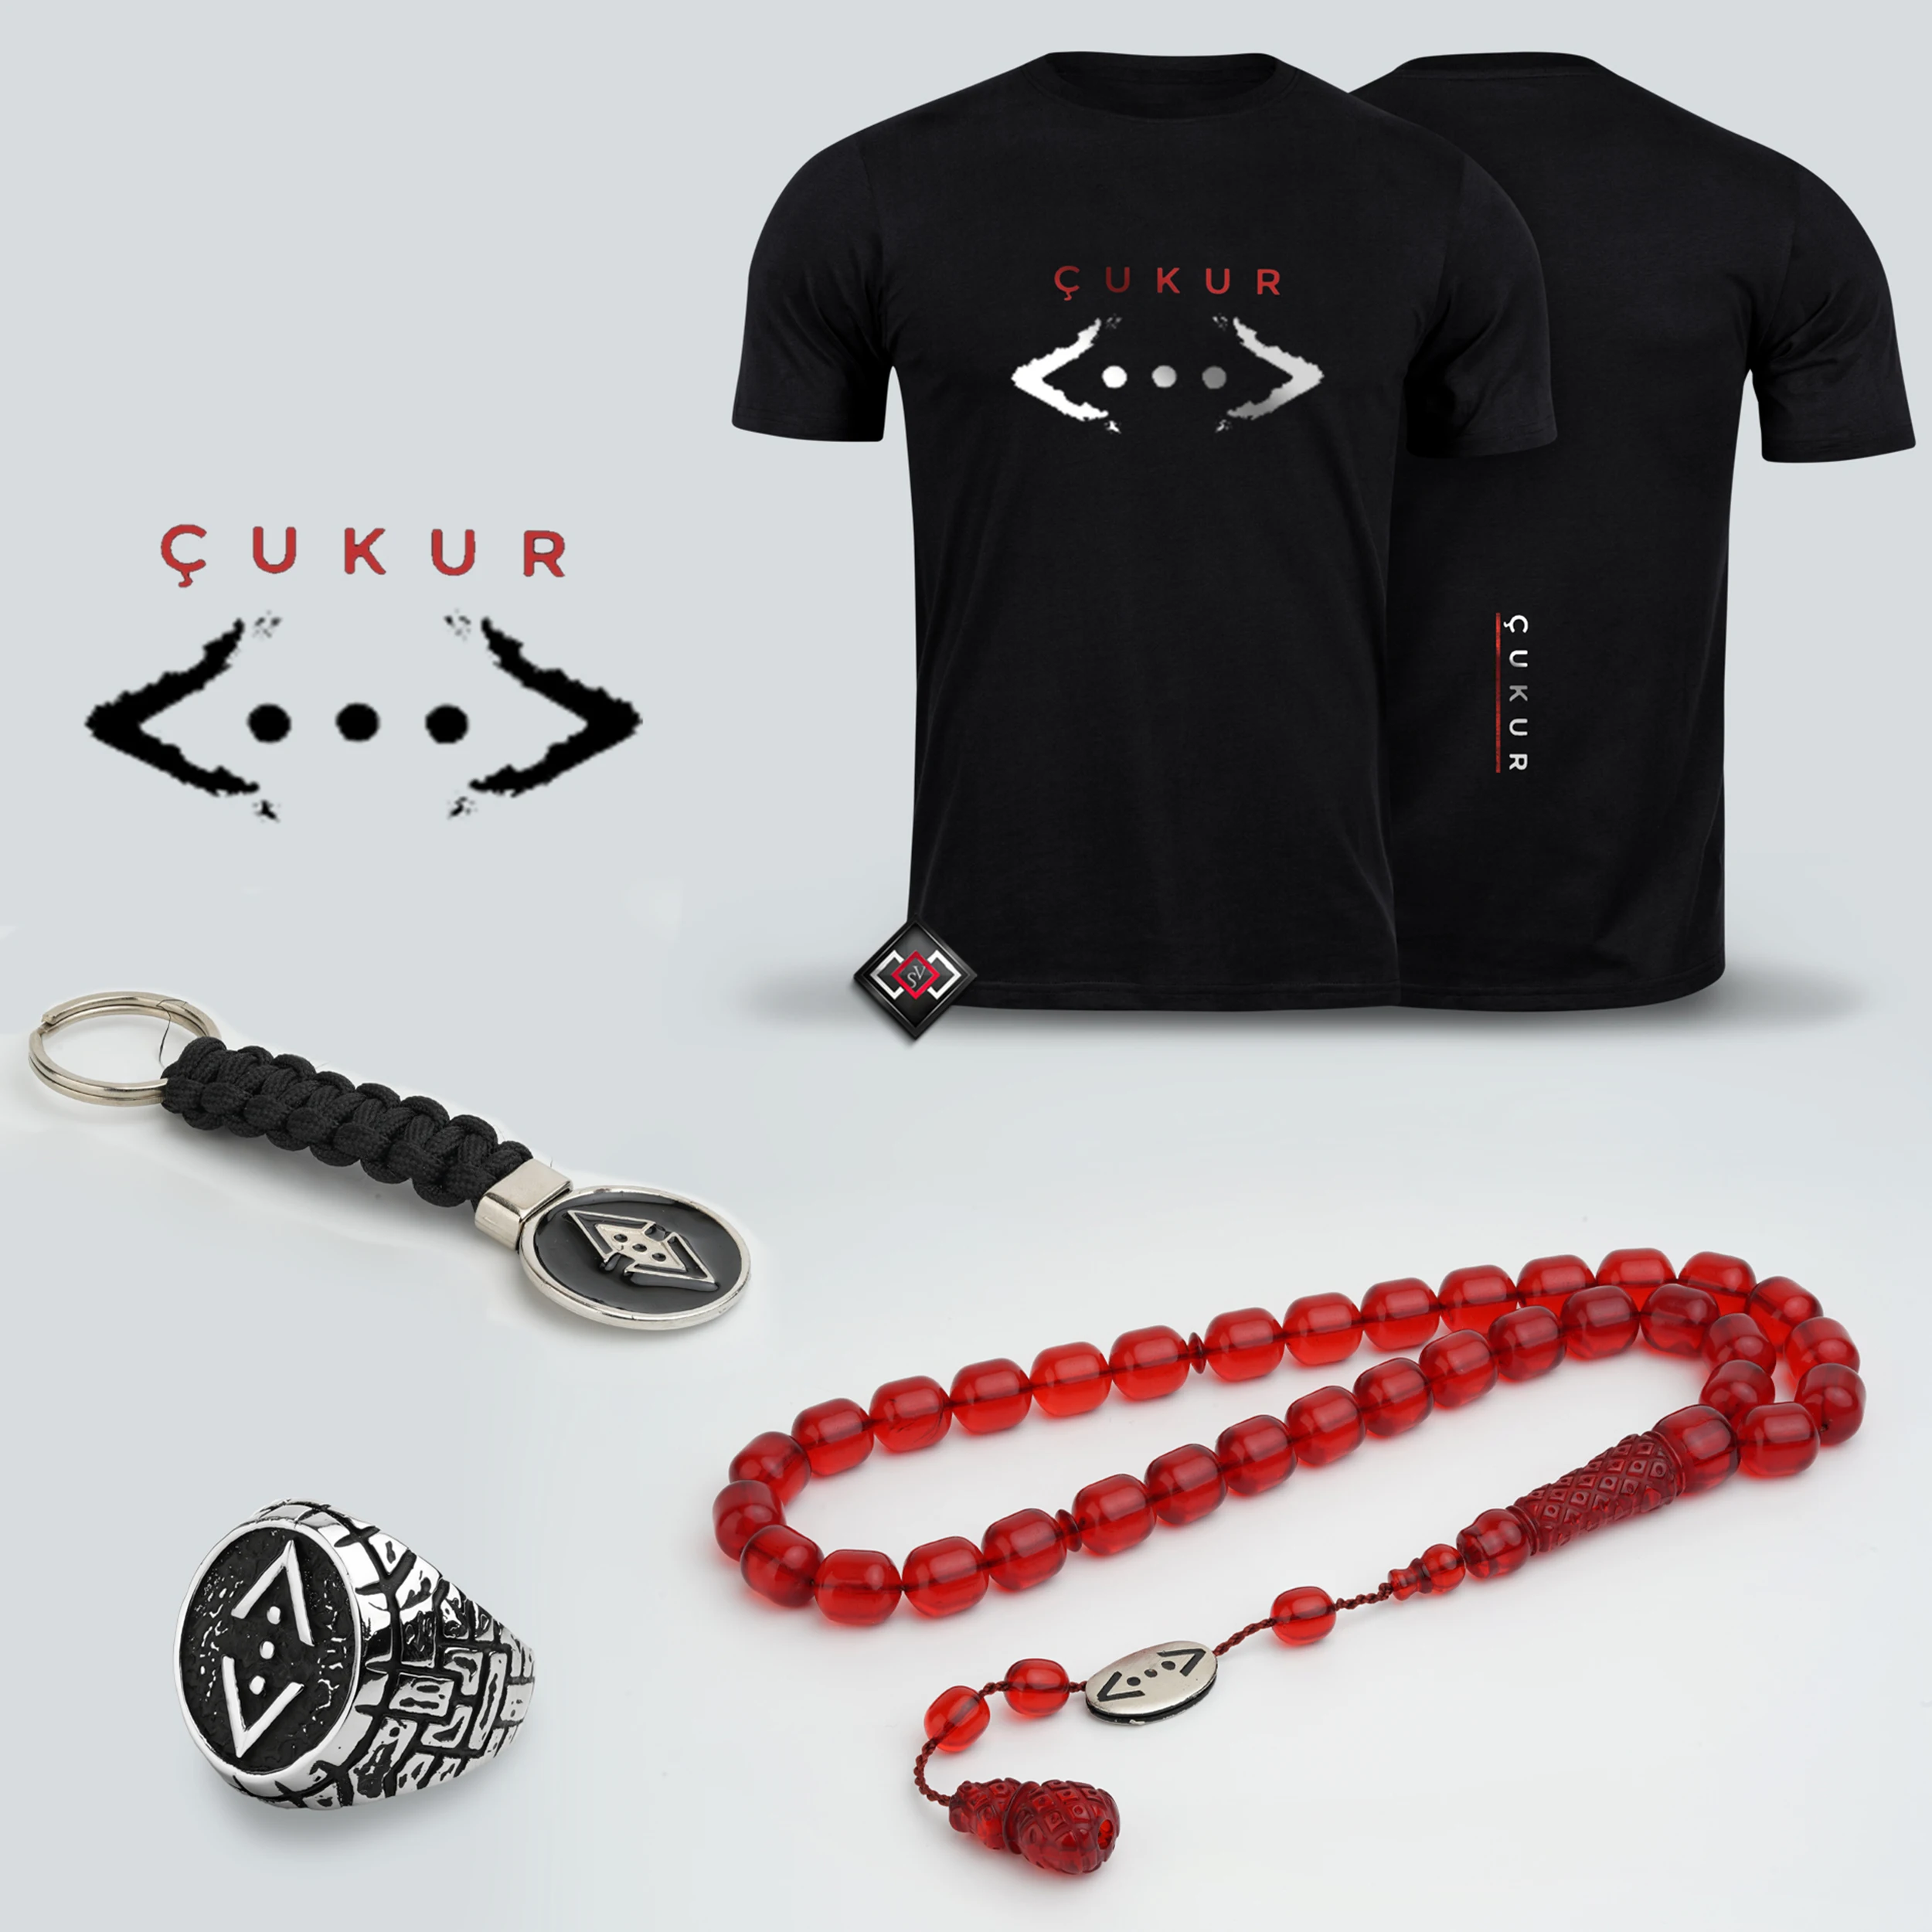 A set of 4 pieces of the çukur logo ( T-shirt , accessory ring , rosary and medal) ....FREE SHIPPING ... Guaranteed high qualit